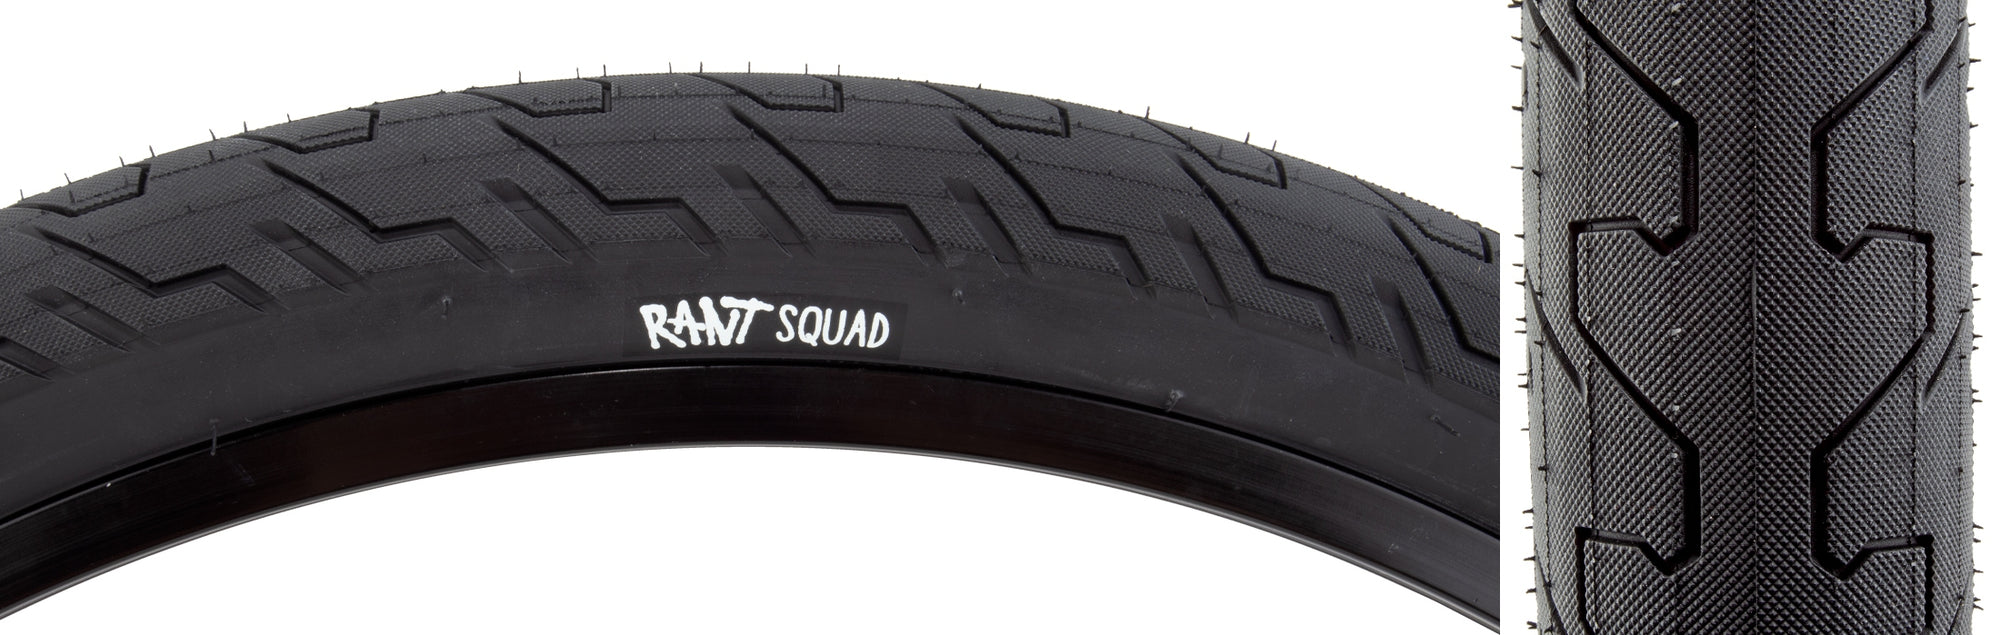 Rant Squad Tires (Various Sizes) - Downtown Bicycle Works 